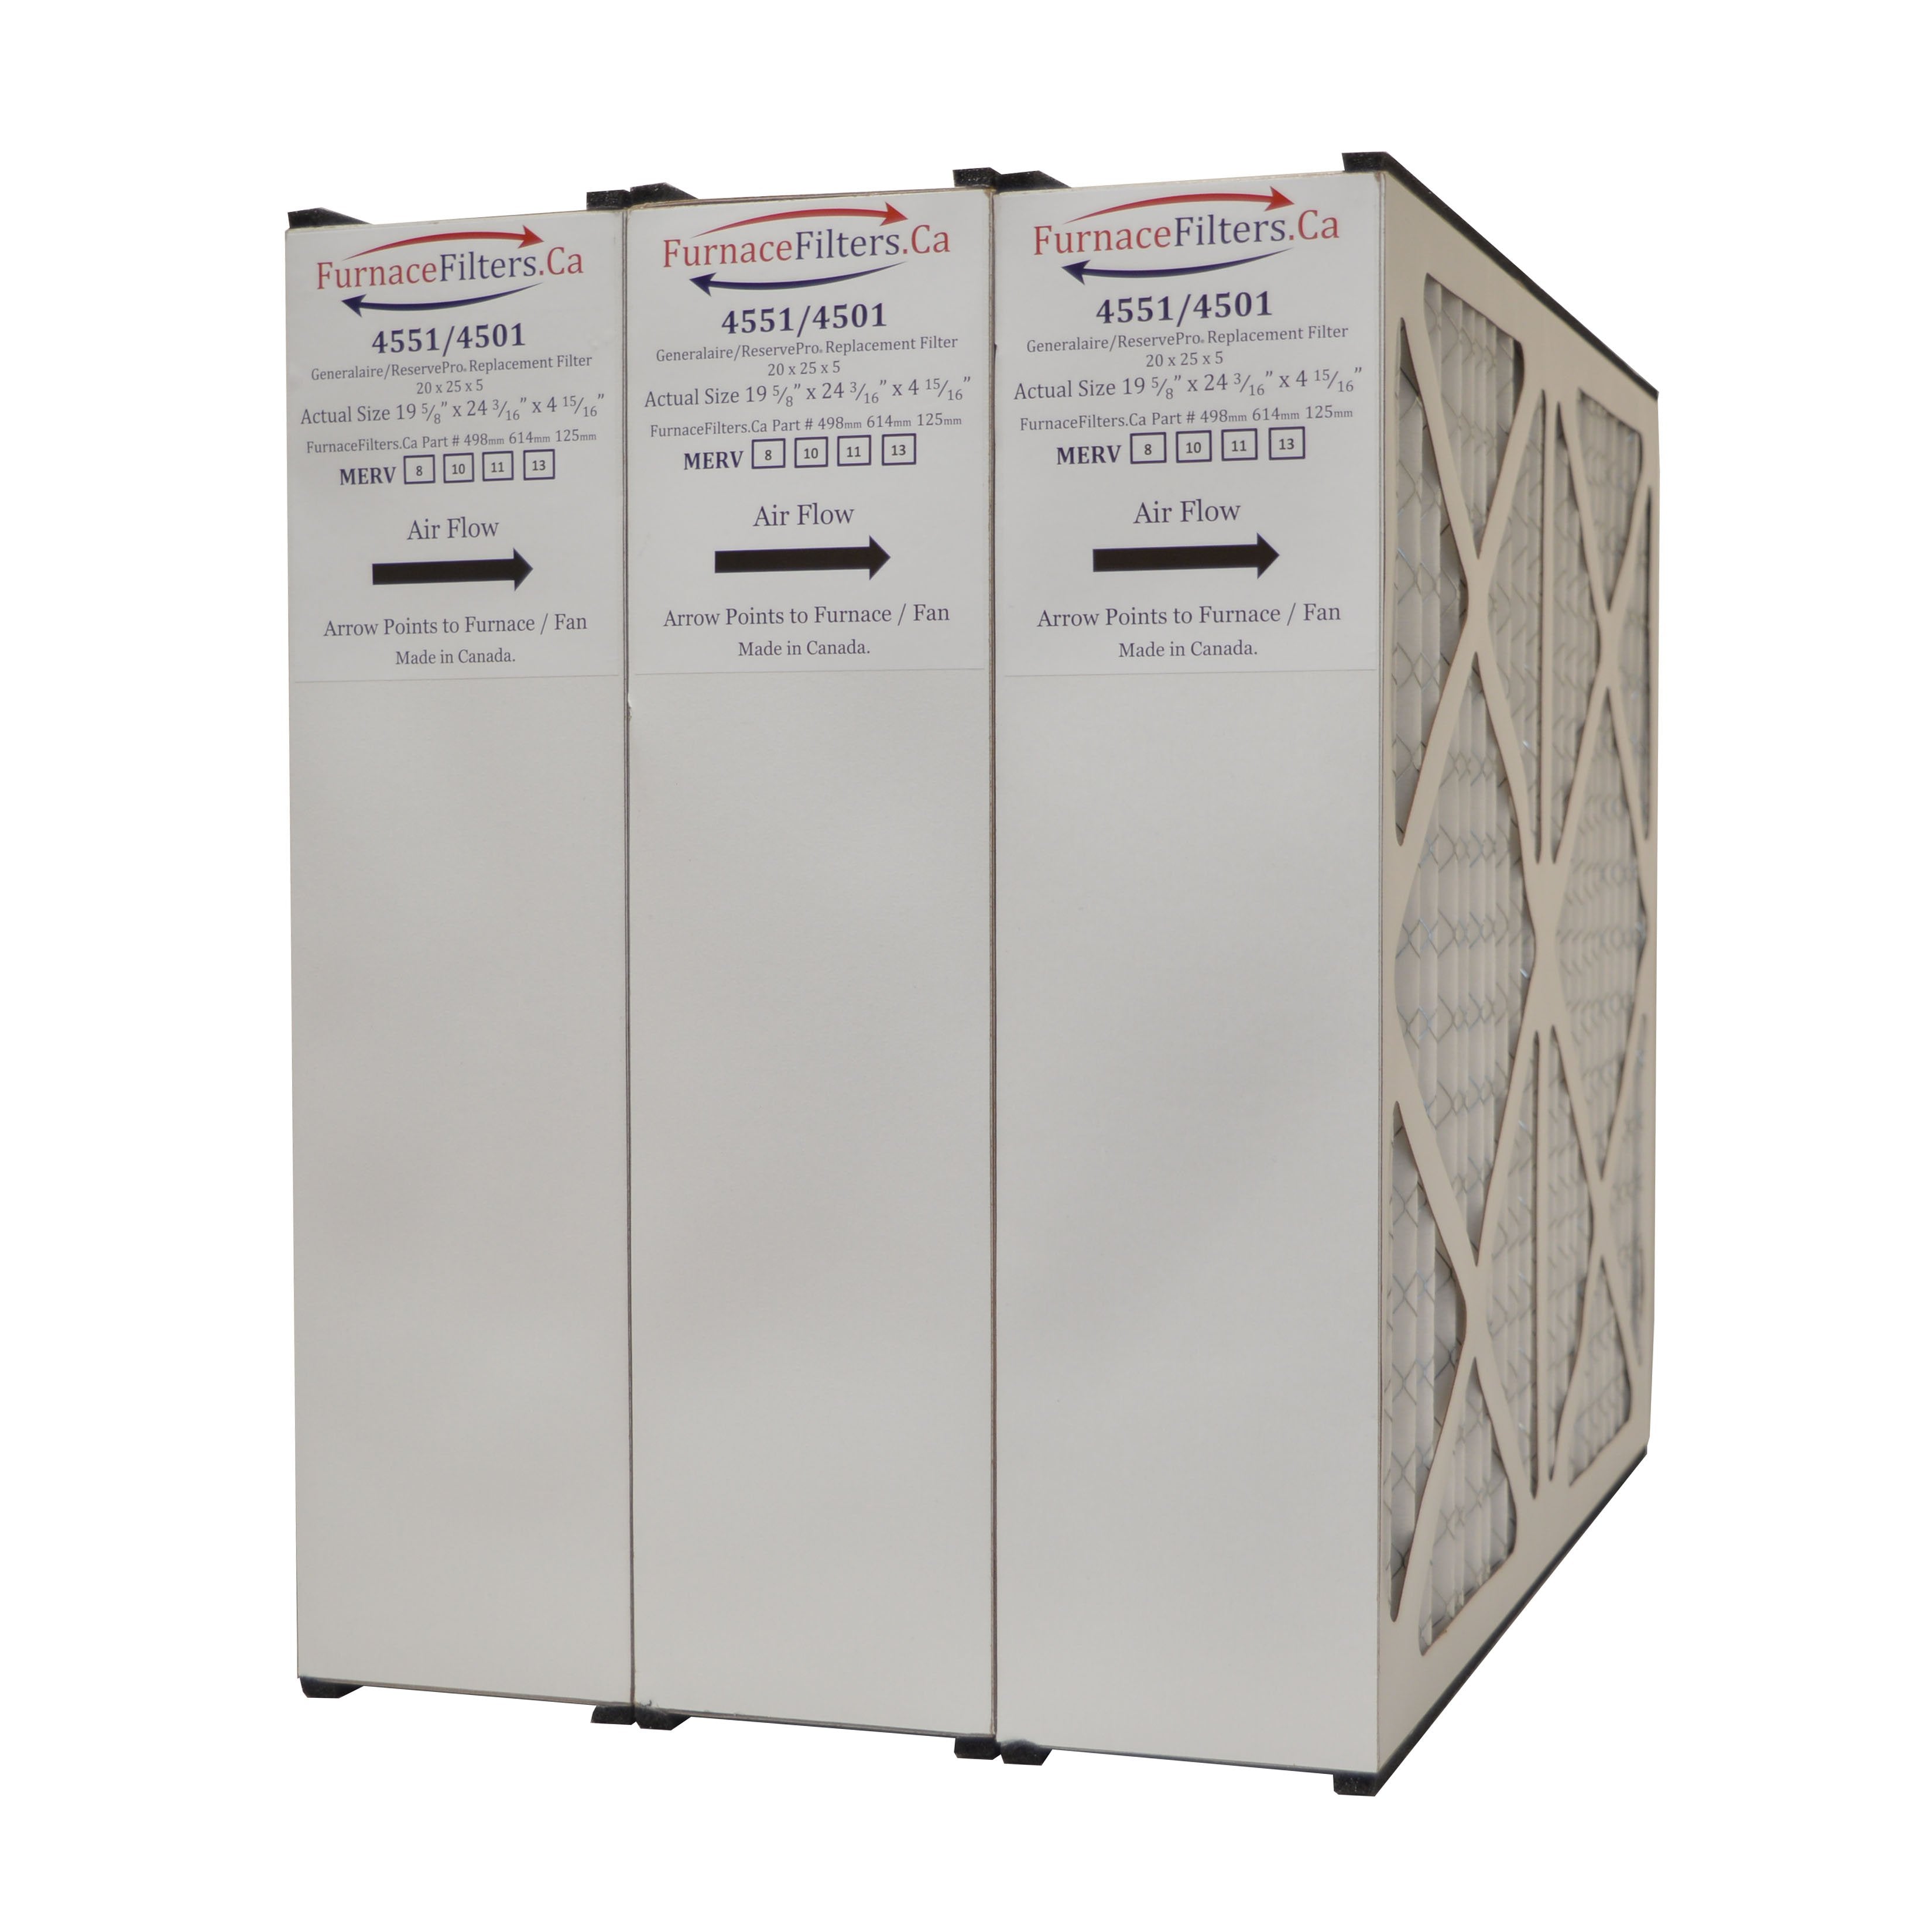 ReservePro 4501 Furnace Filter MERV 10 GF 4551 Mac 2000 Replacement 20x25x5. Case of 3 Made in Canada by FurnaceFilters.Ca